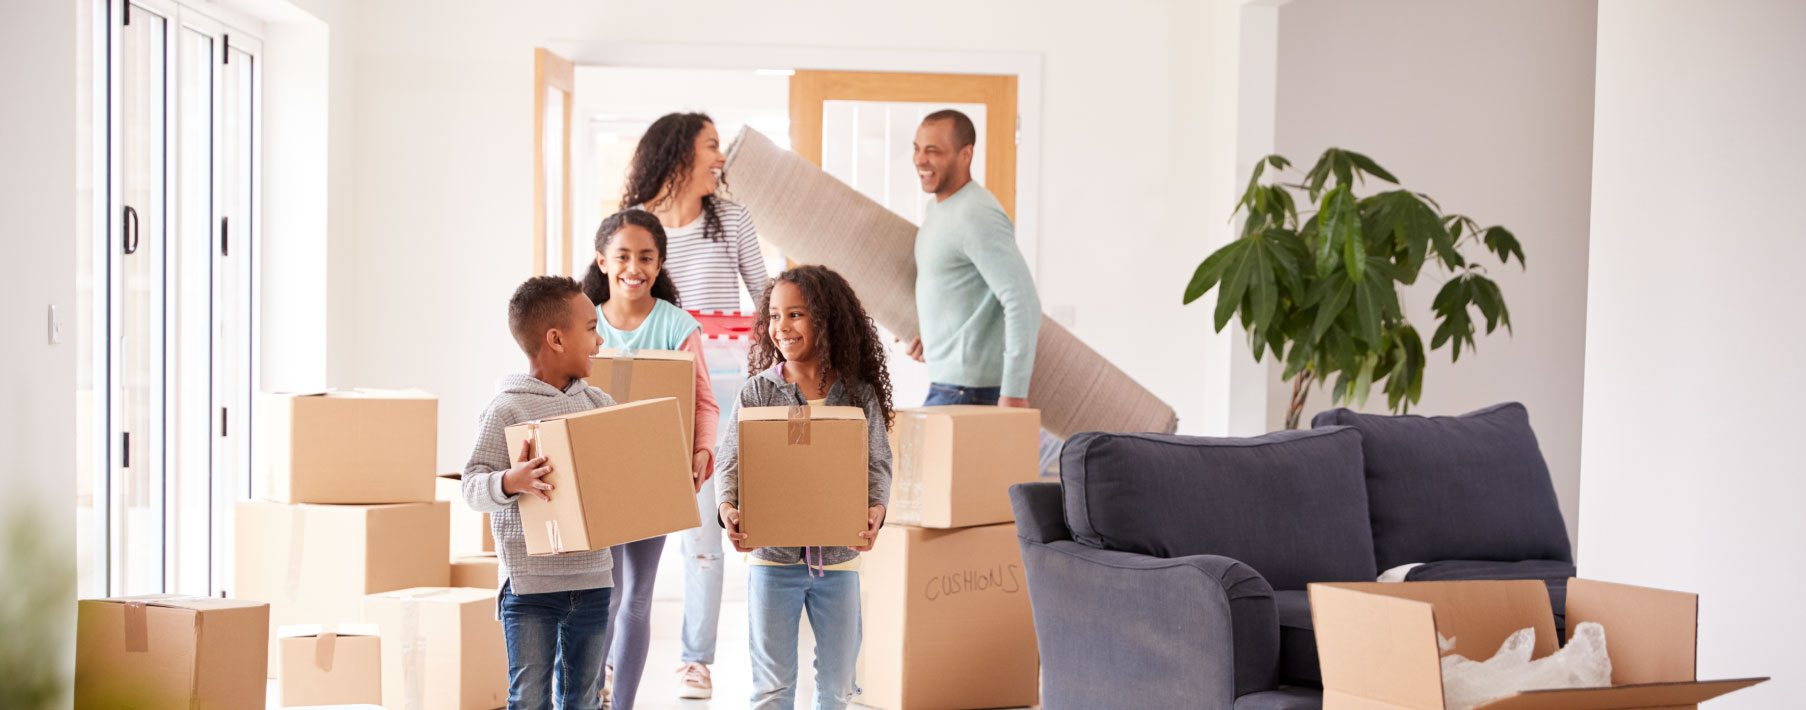 A family moves boxes into a home. A young boy and girl are in front smiling at each other, followed by another girl. The mom and dad are in the back of the room laughing. 